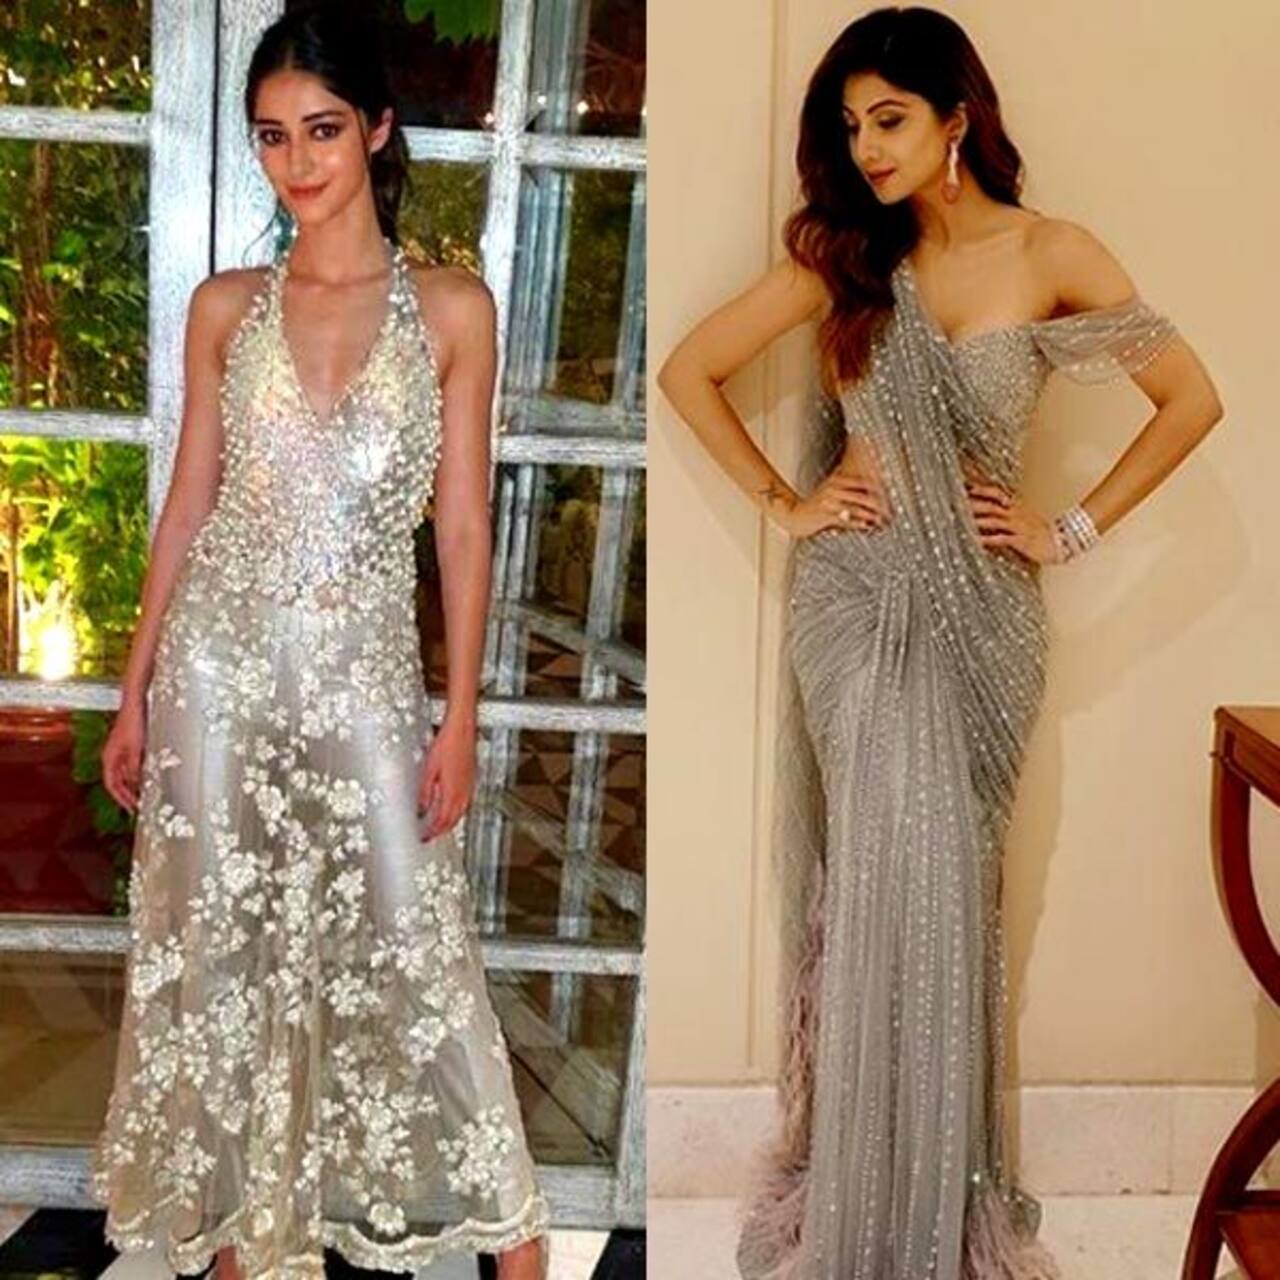 Diwali 2018: From Ananya Panday to Shilpa Shetty - this festive season let the divas teach you how to look like a pataakha